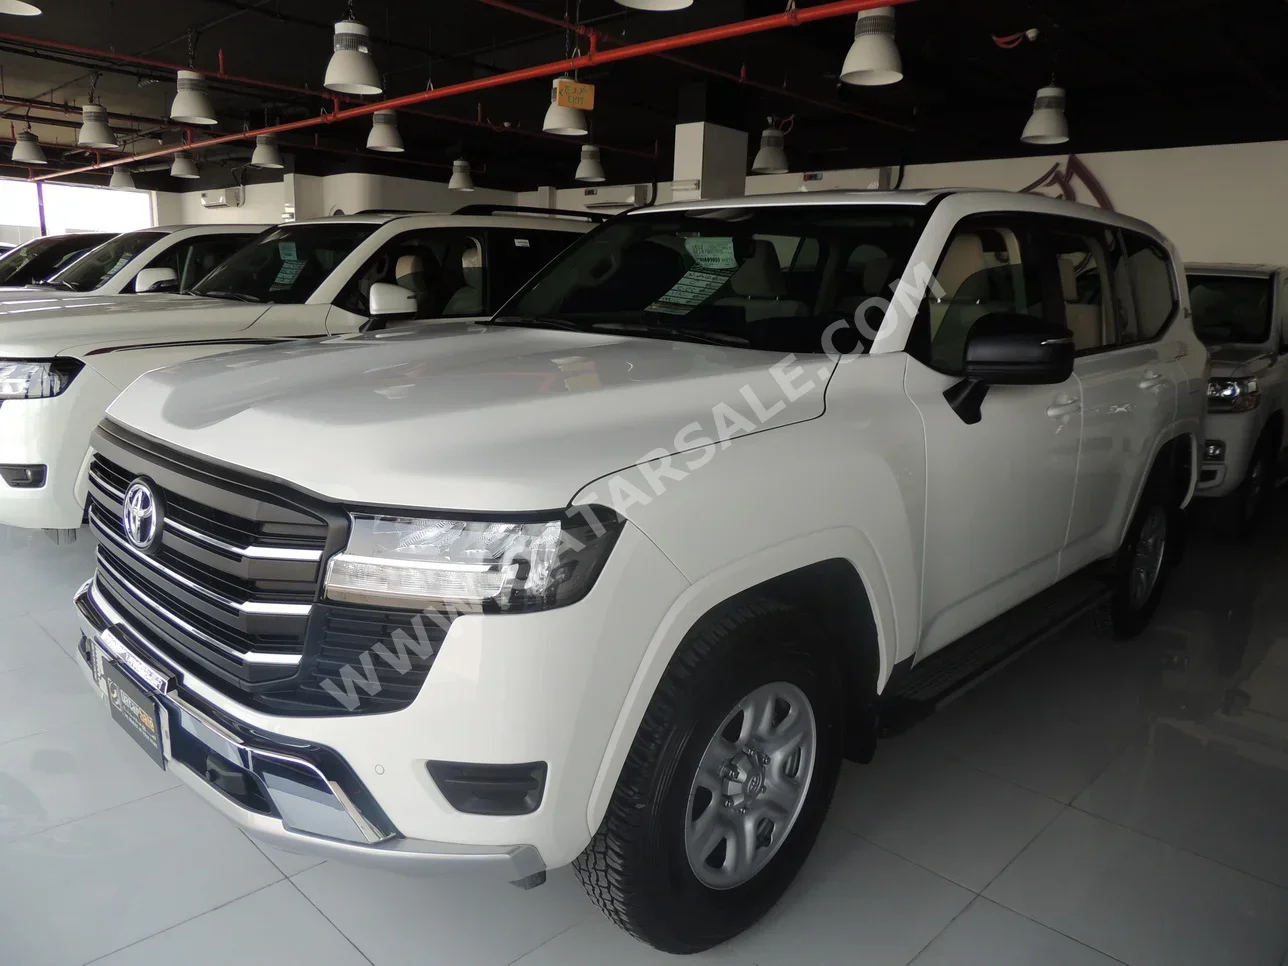 Toyota  Land Cruiser  G  2022  Automatic  118,000 Km  6 Cylinder  Four Wheel Drive (4WD)  SUV  White  With Warranty